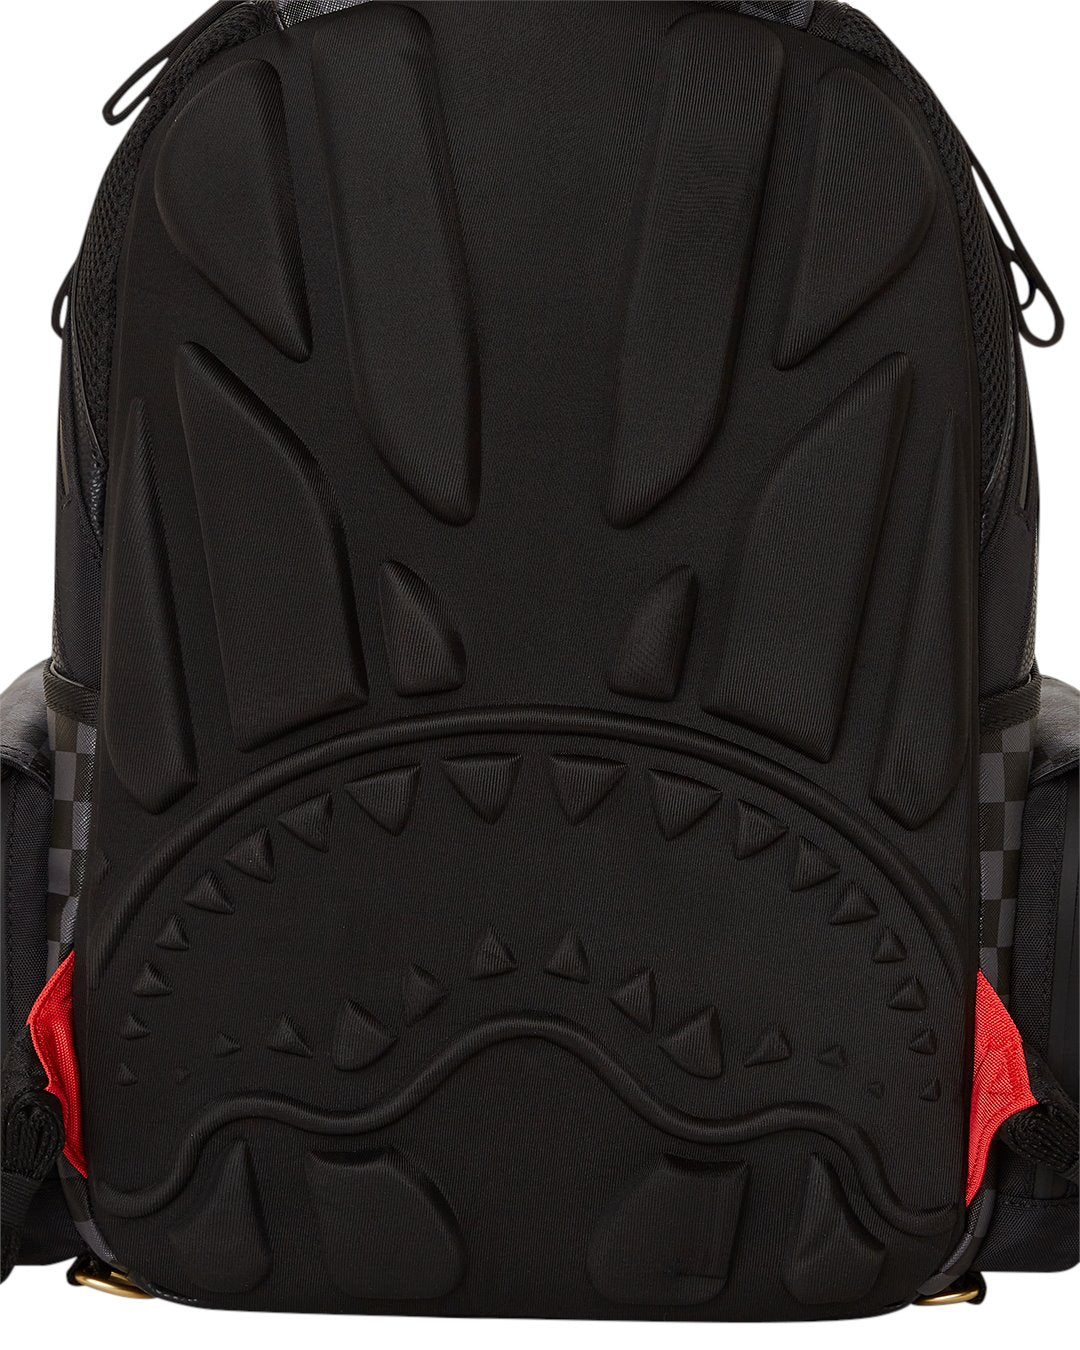 SPECIAL OPS CHECK DLXSV BACKPACK